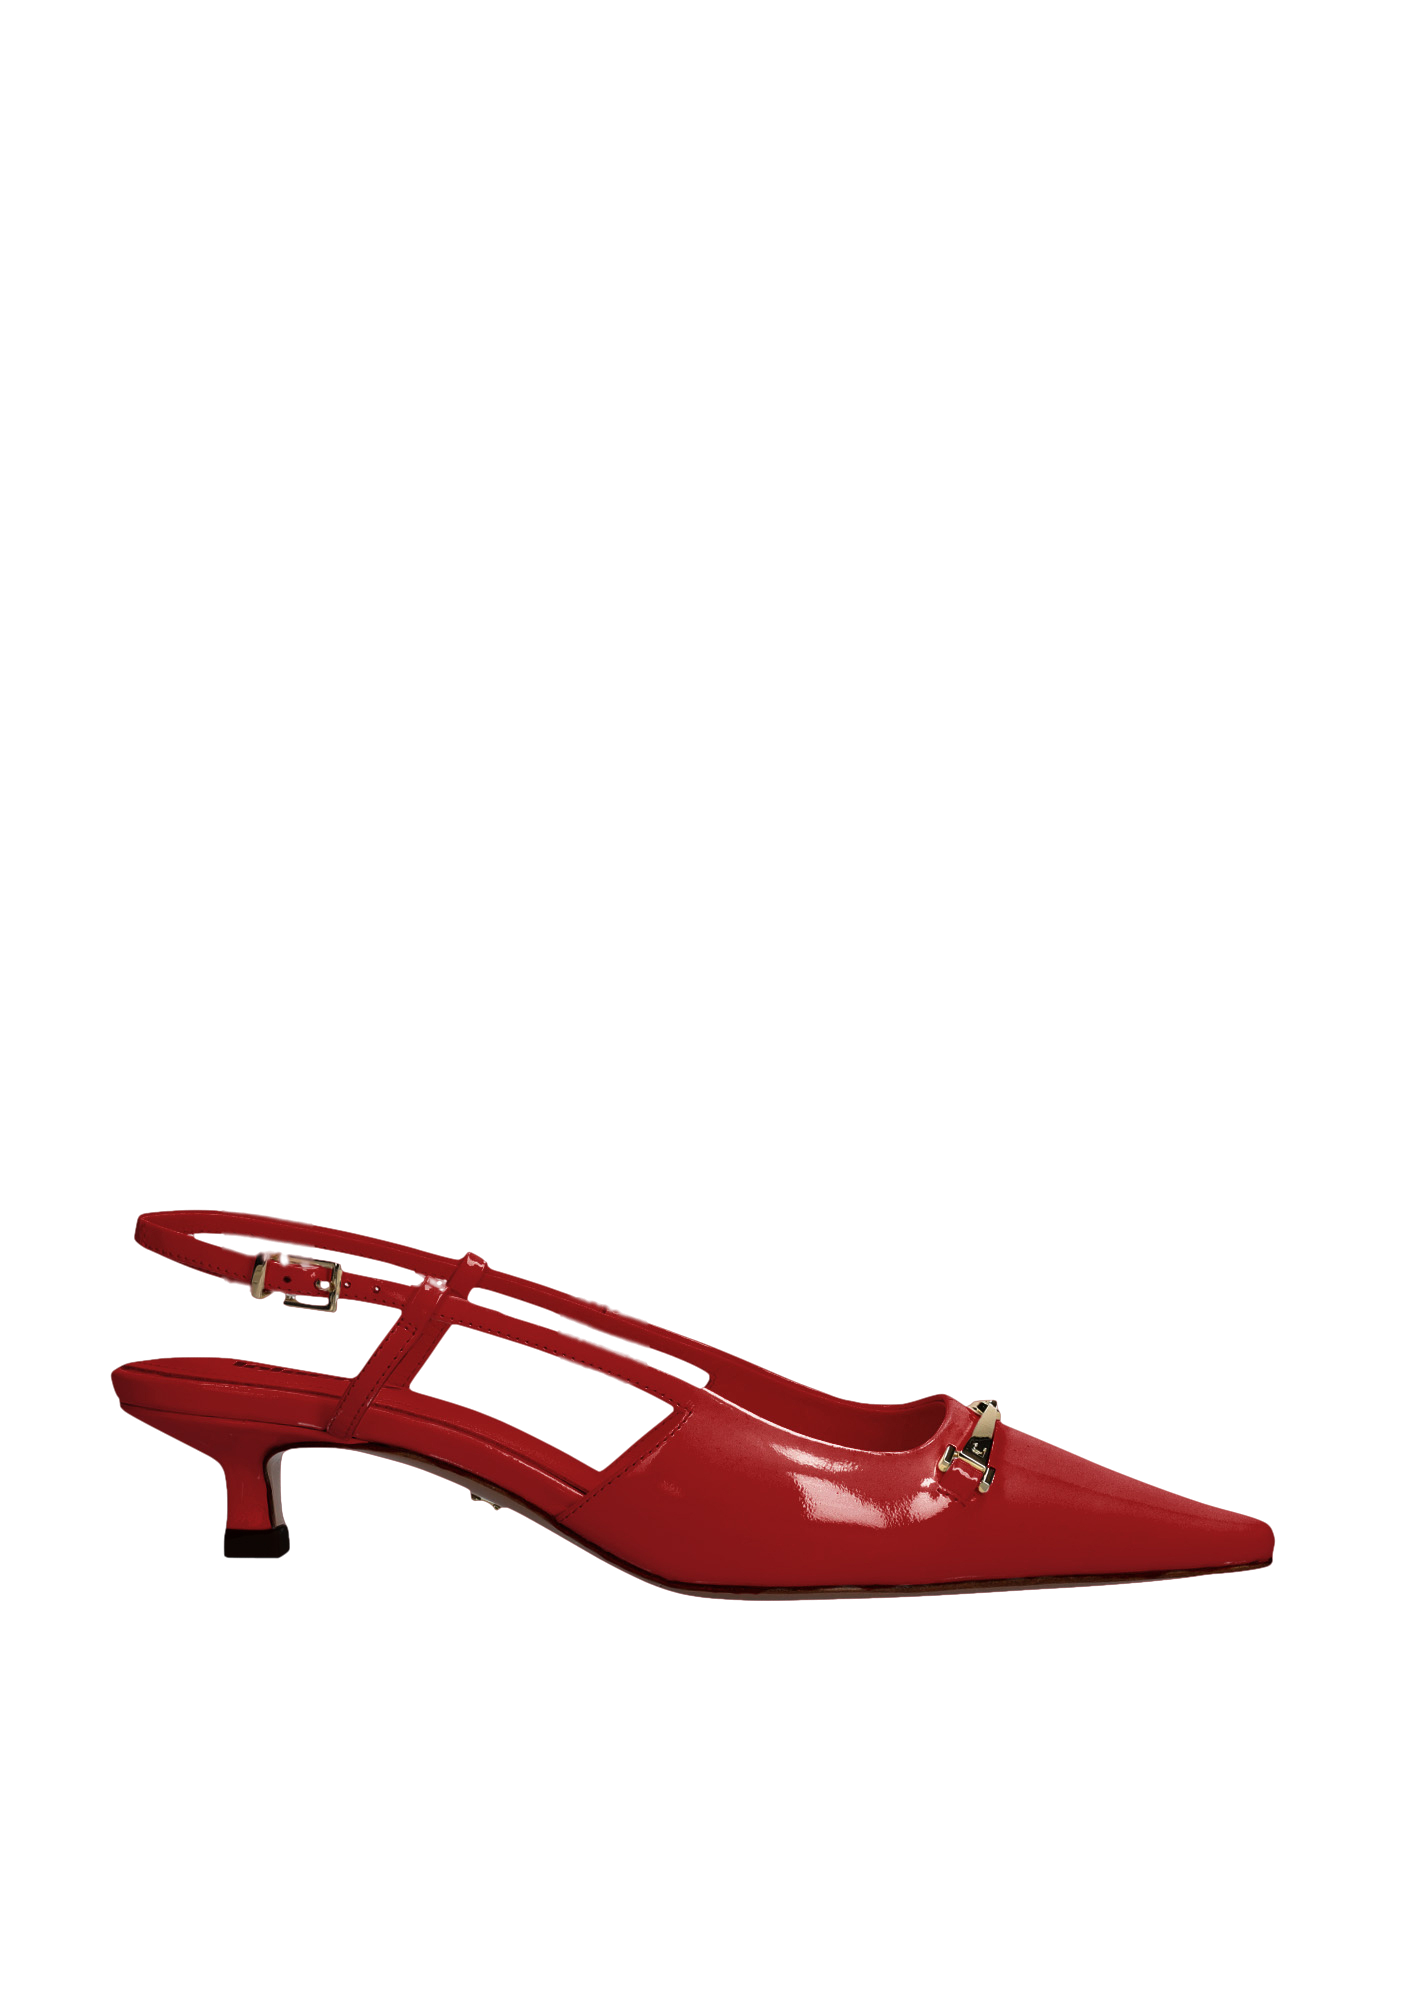 Lola Cruz Shoes Clover 35 In Red